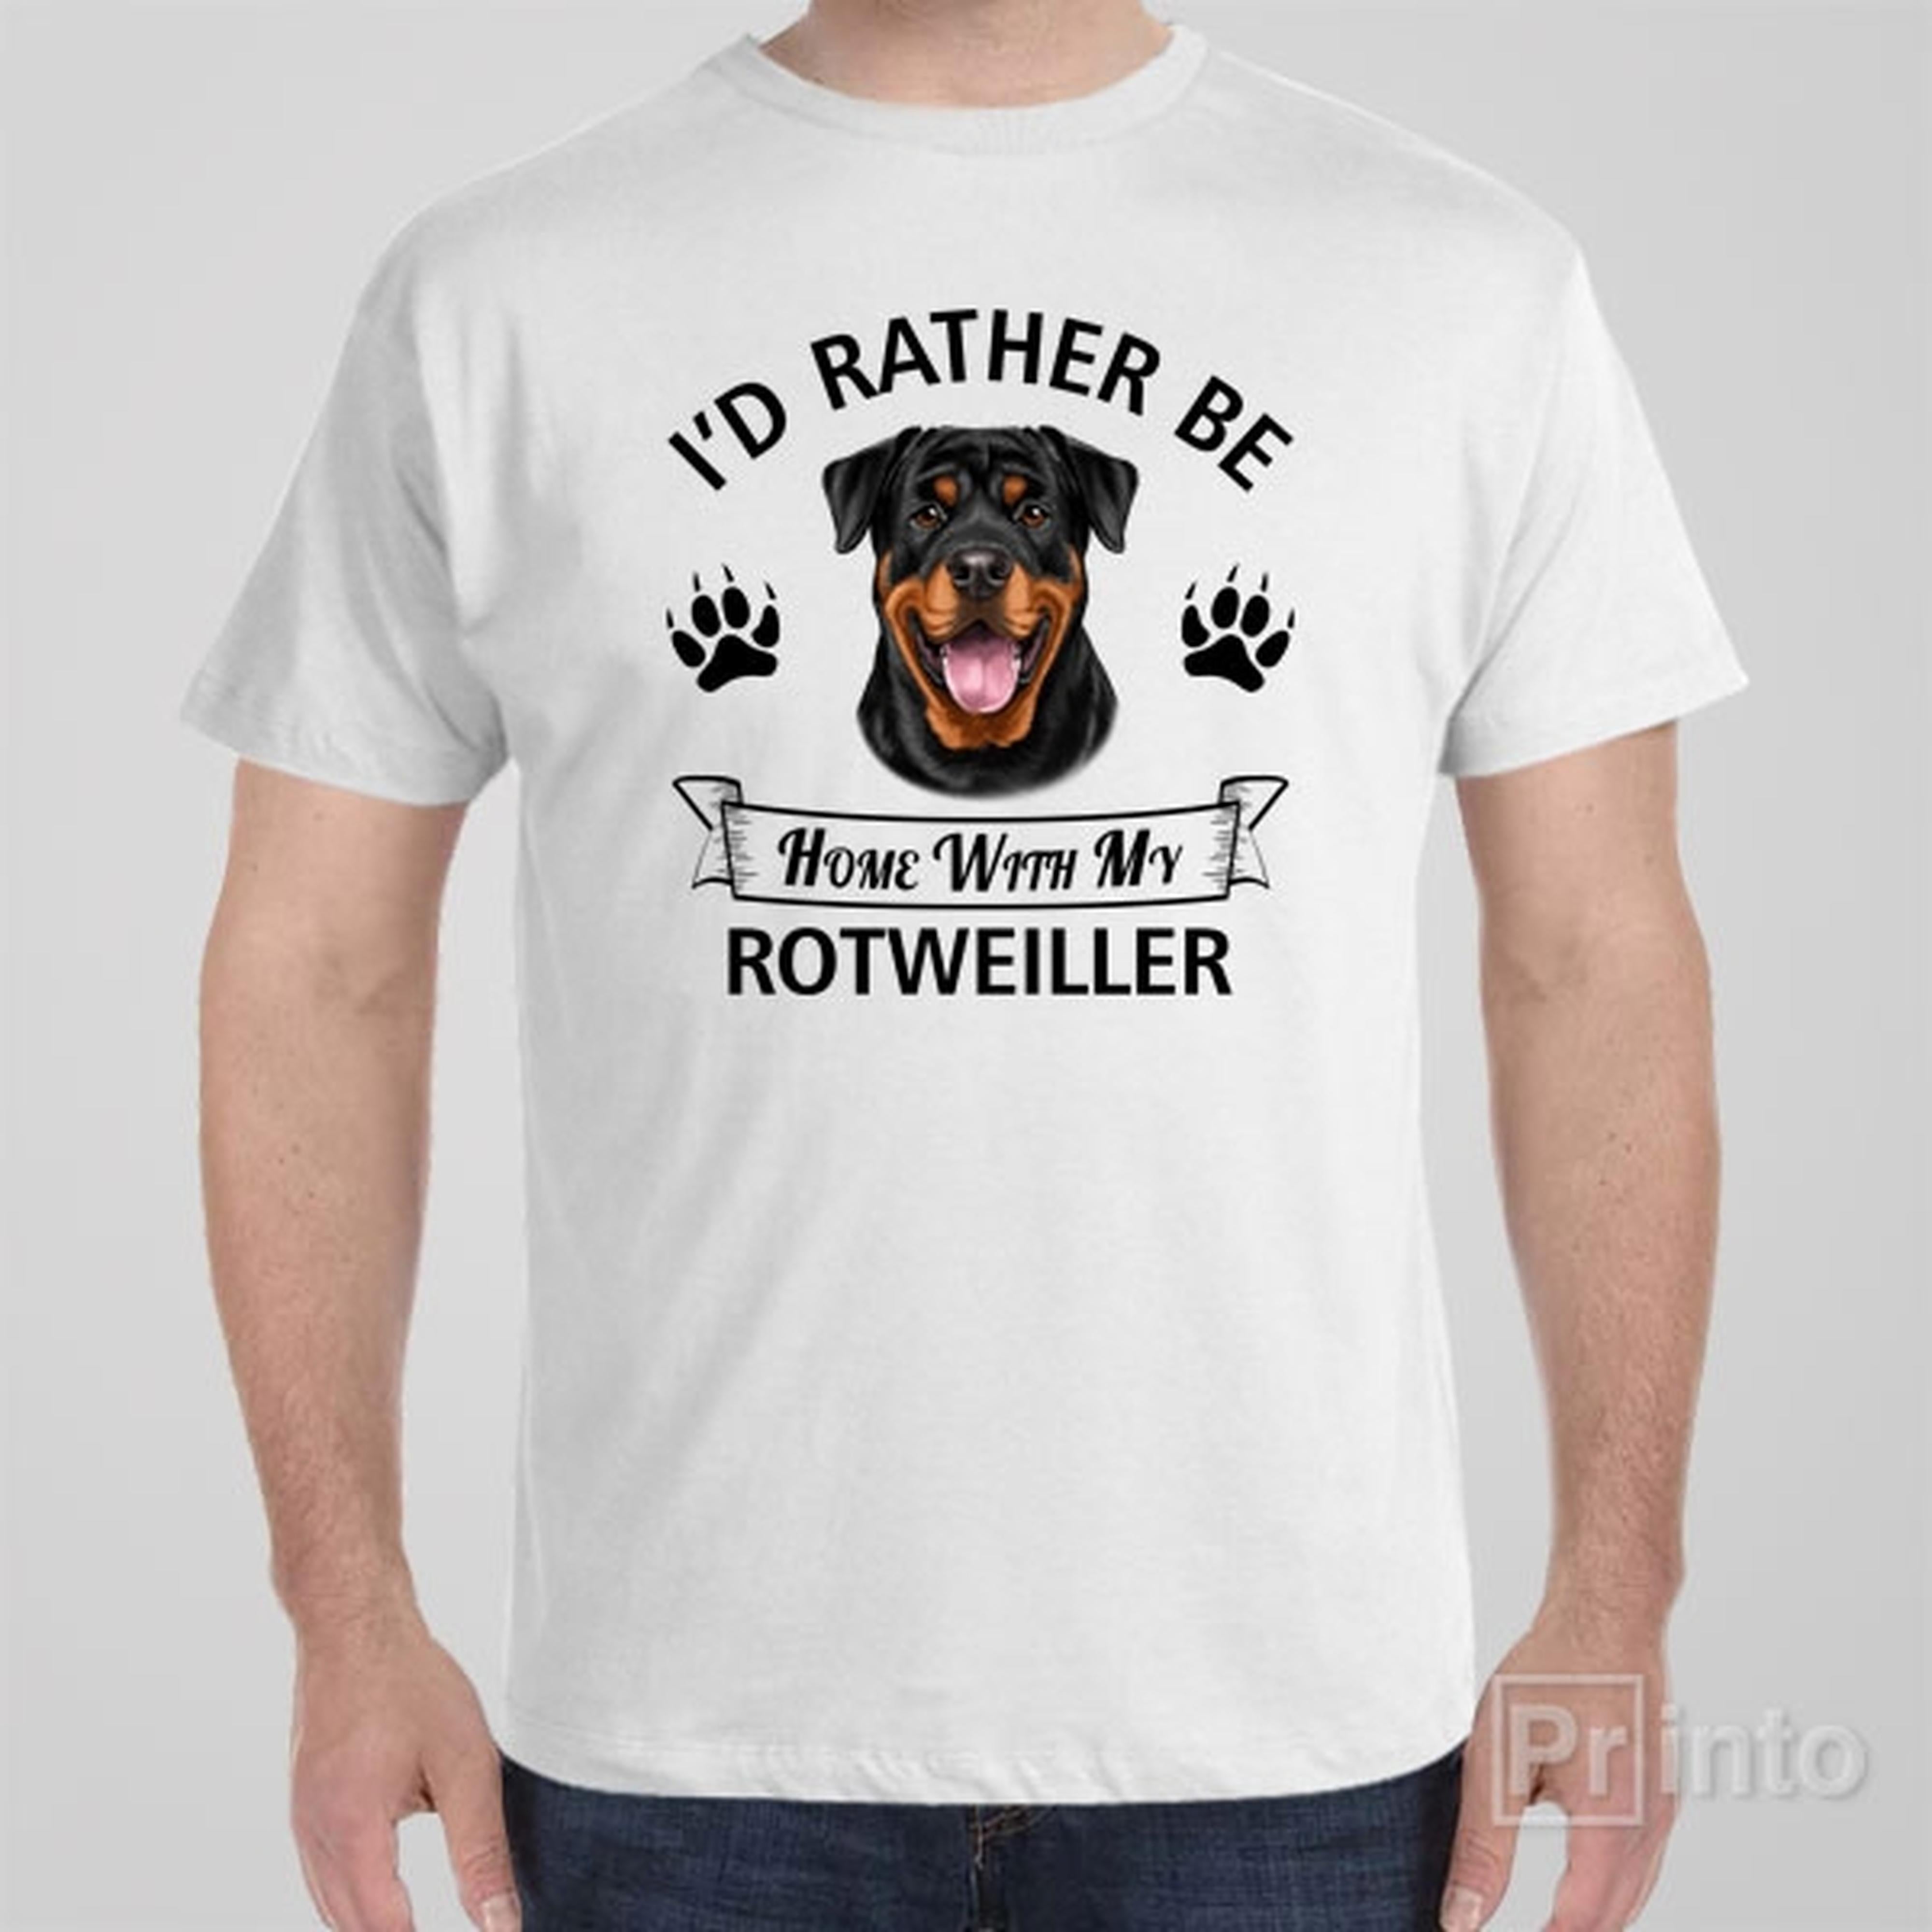 id-rather-stay-home-with-my-rotweiller-t-shirt